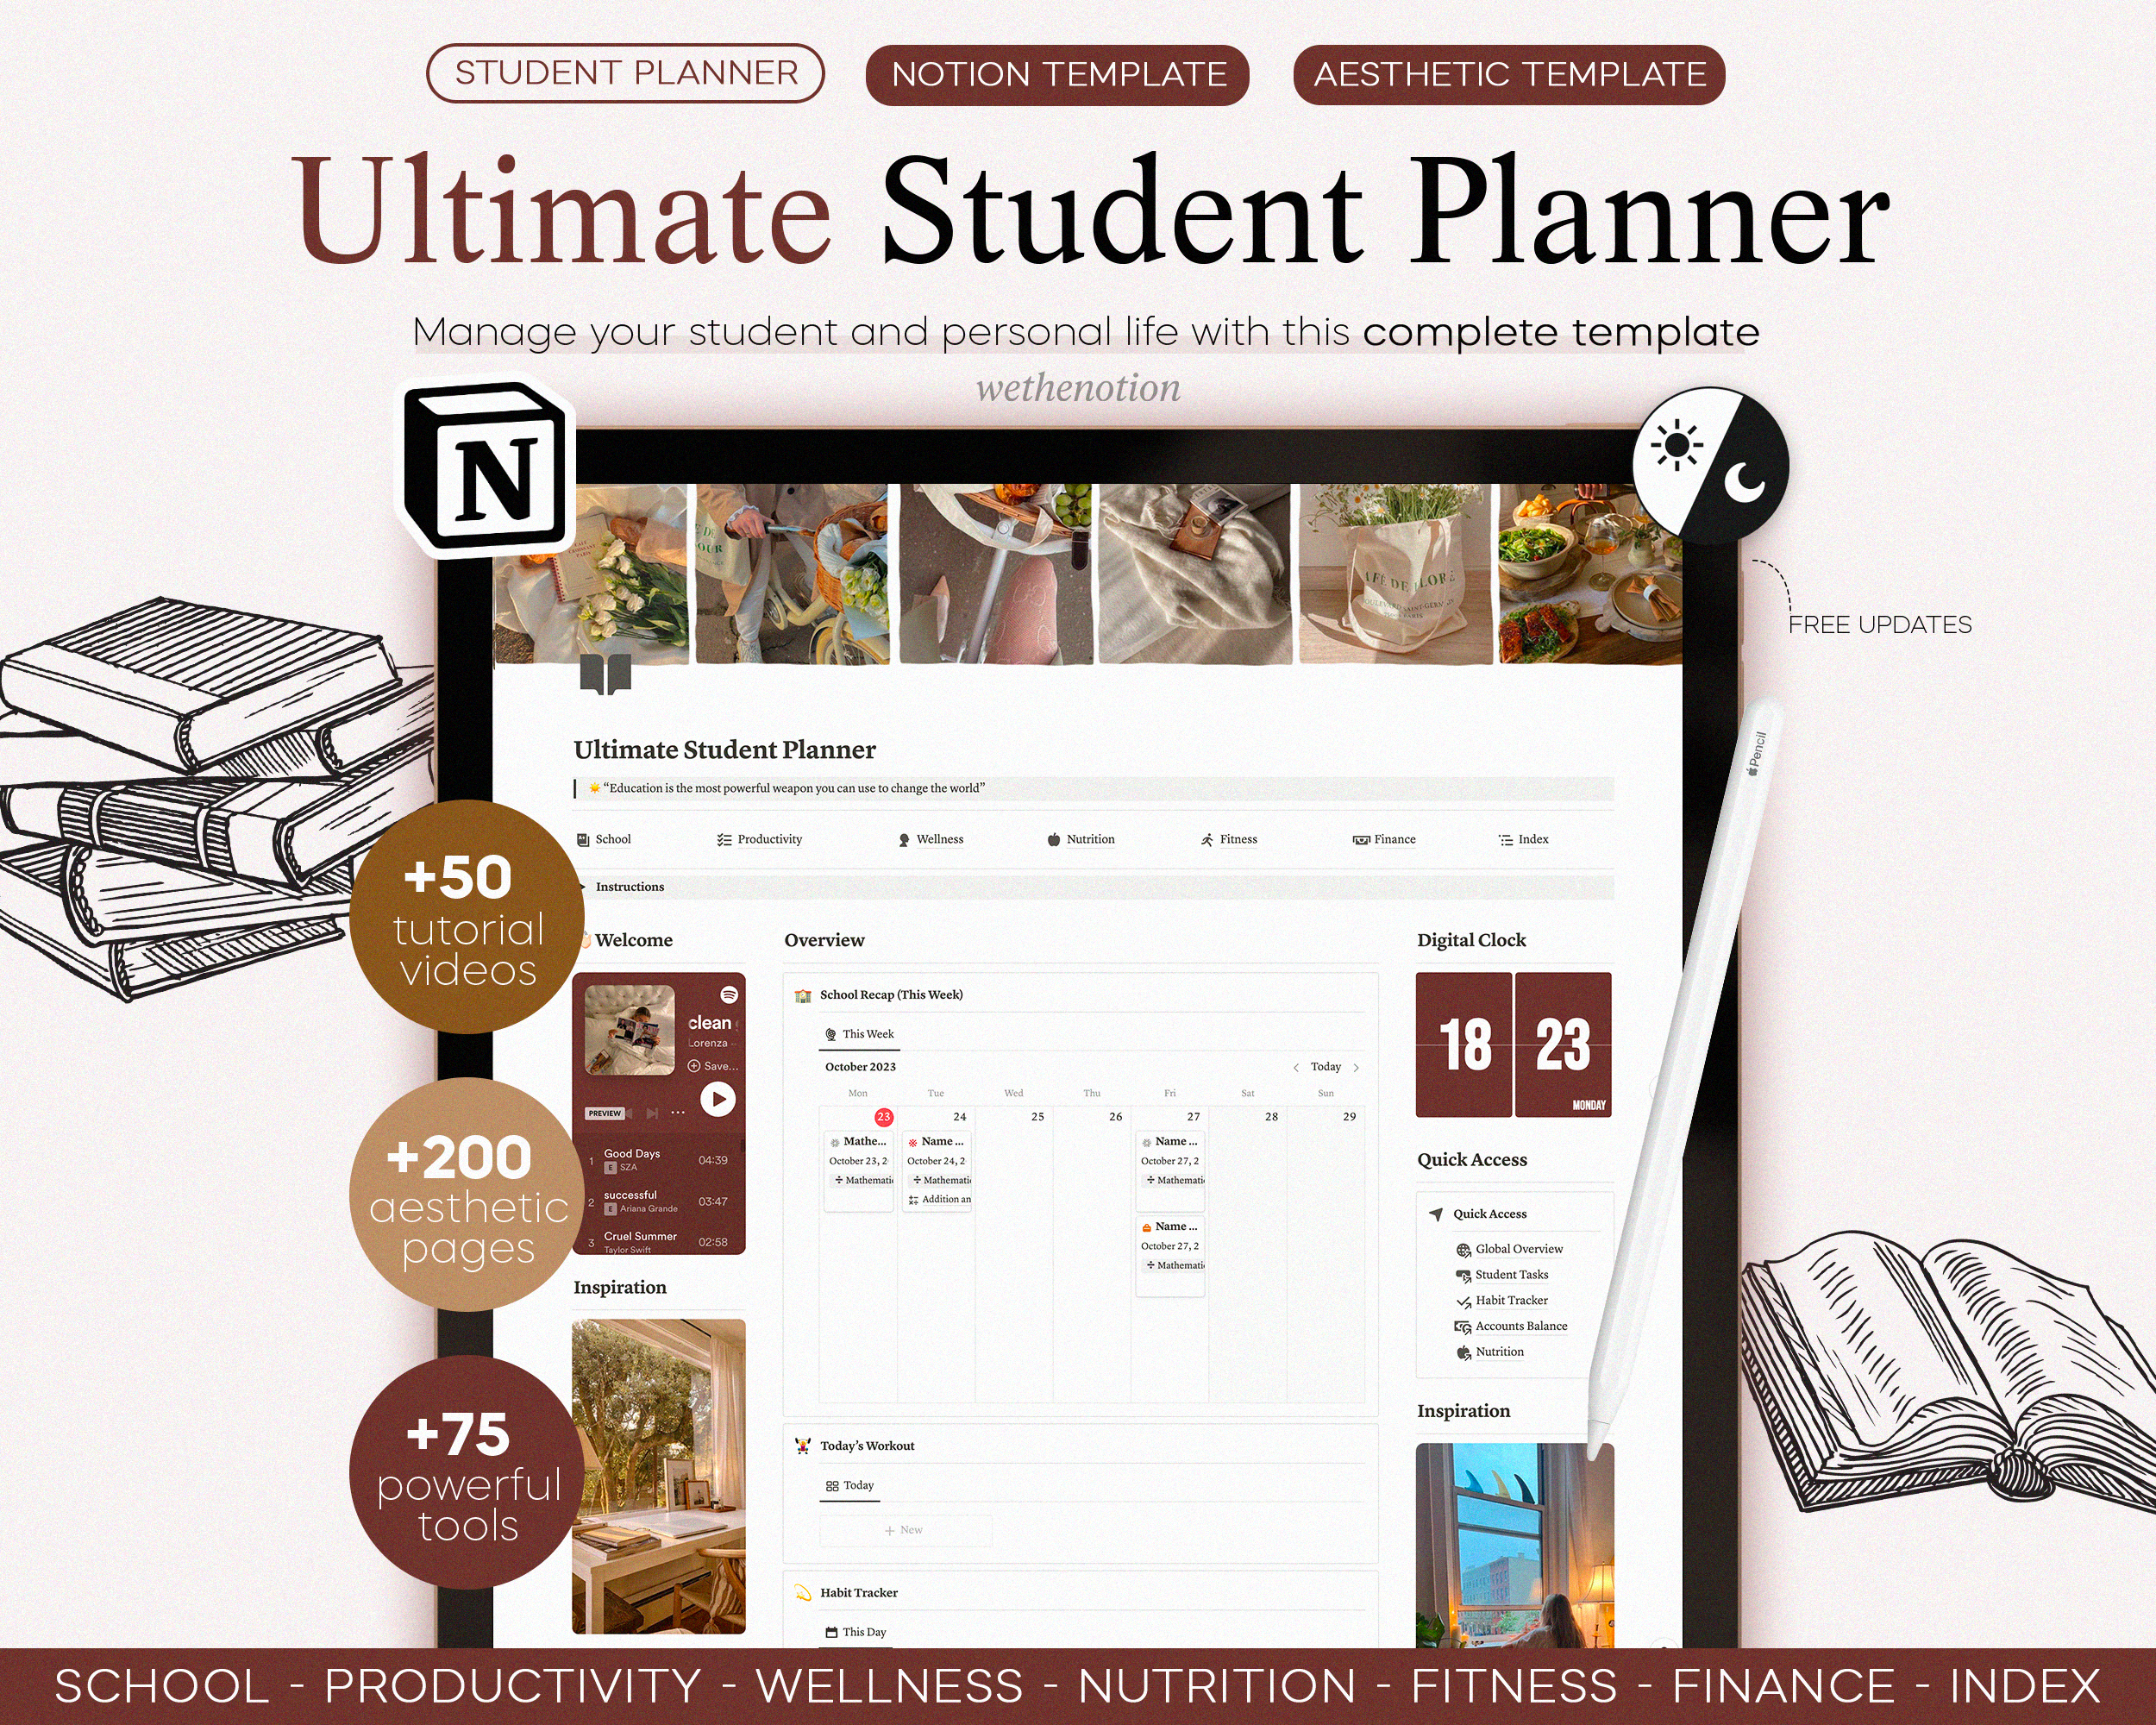 student notion template